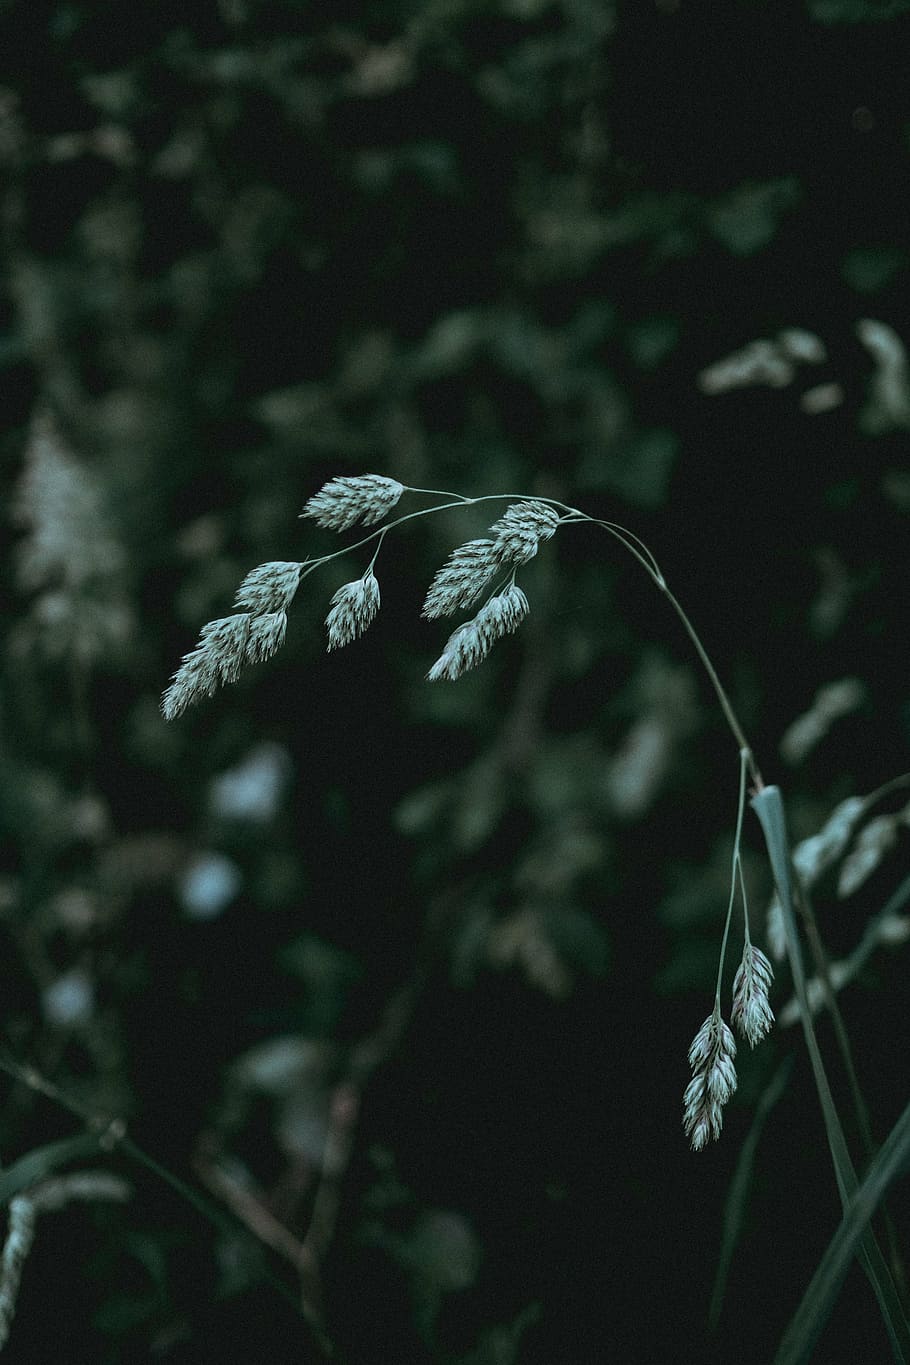 selective, focus photo, green, grass, dark, outdoor, plant, nature, growth, fragility